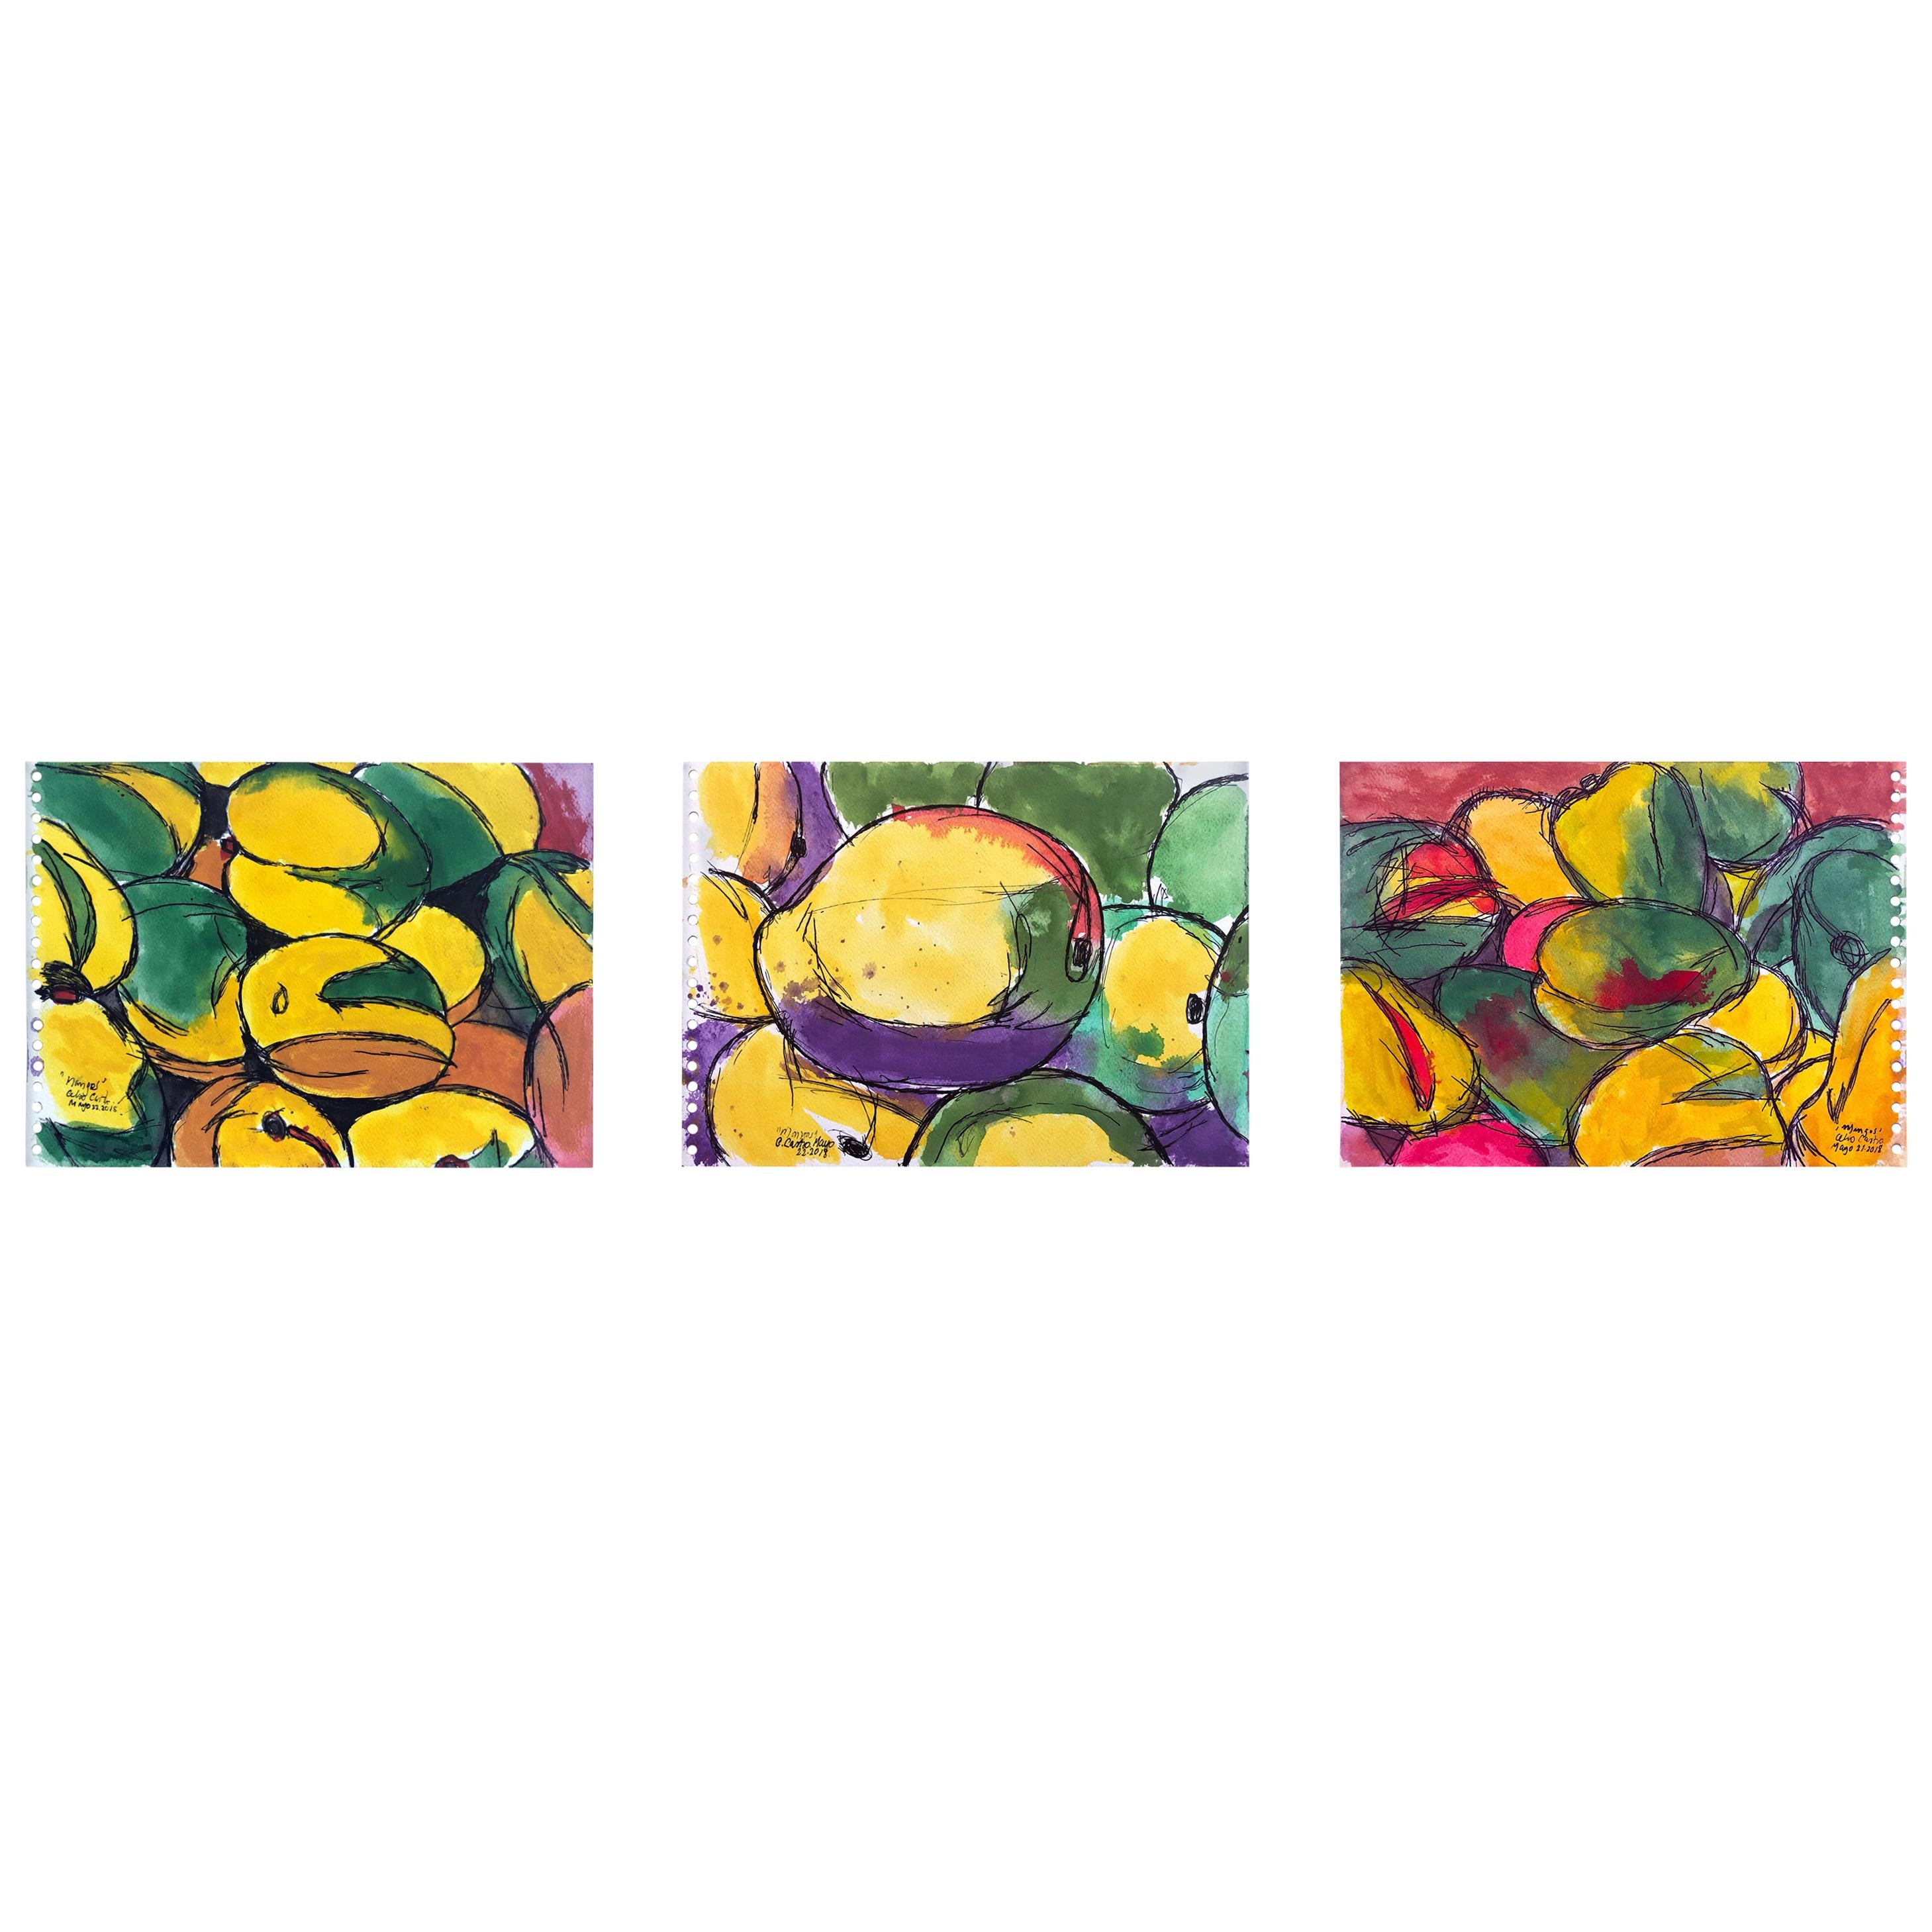 Mangos 'D3', Watercolor and Ink on Archival Paper, Triptych, 2018